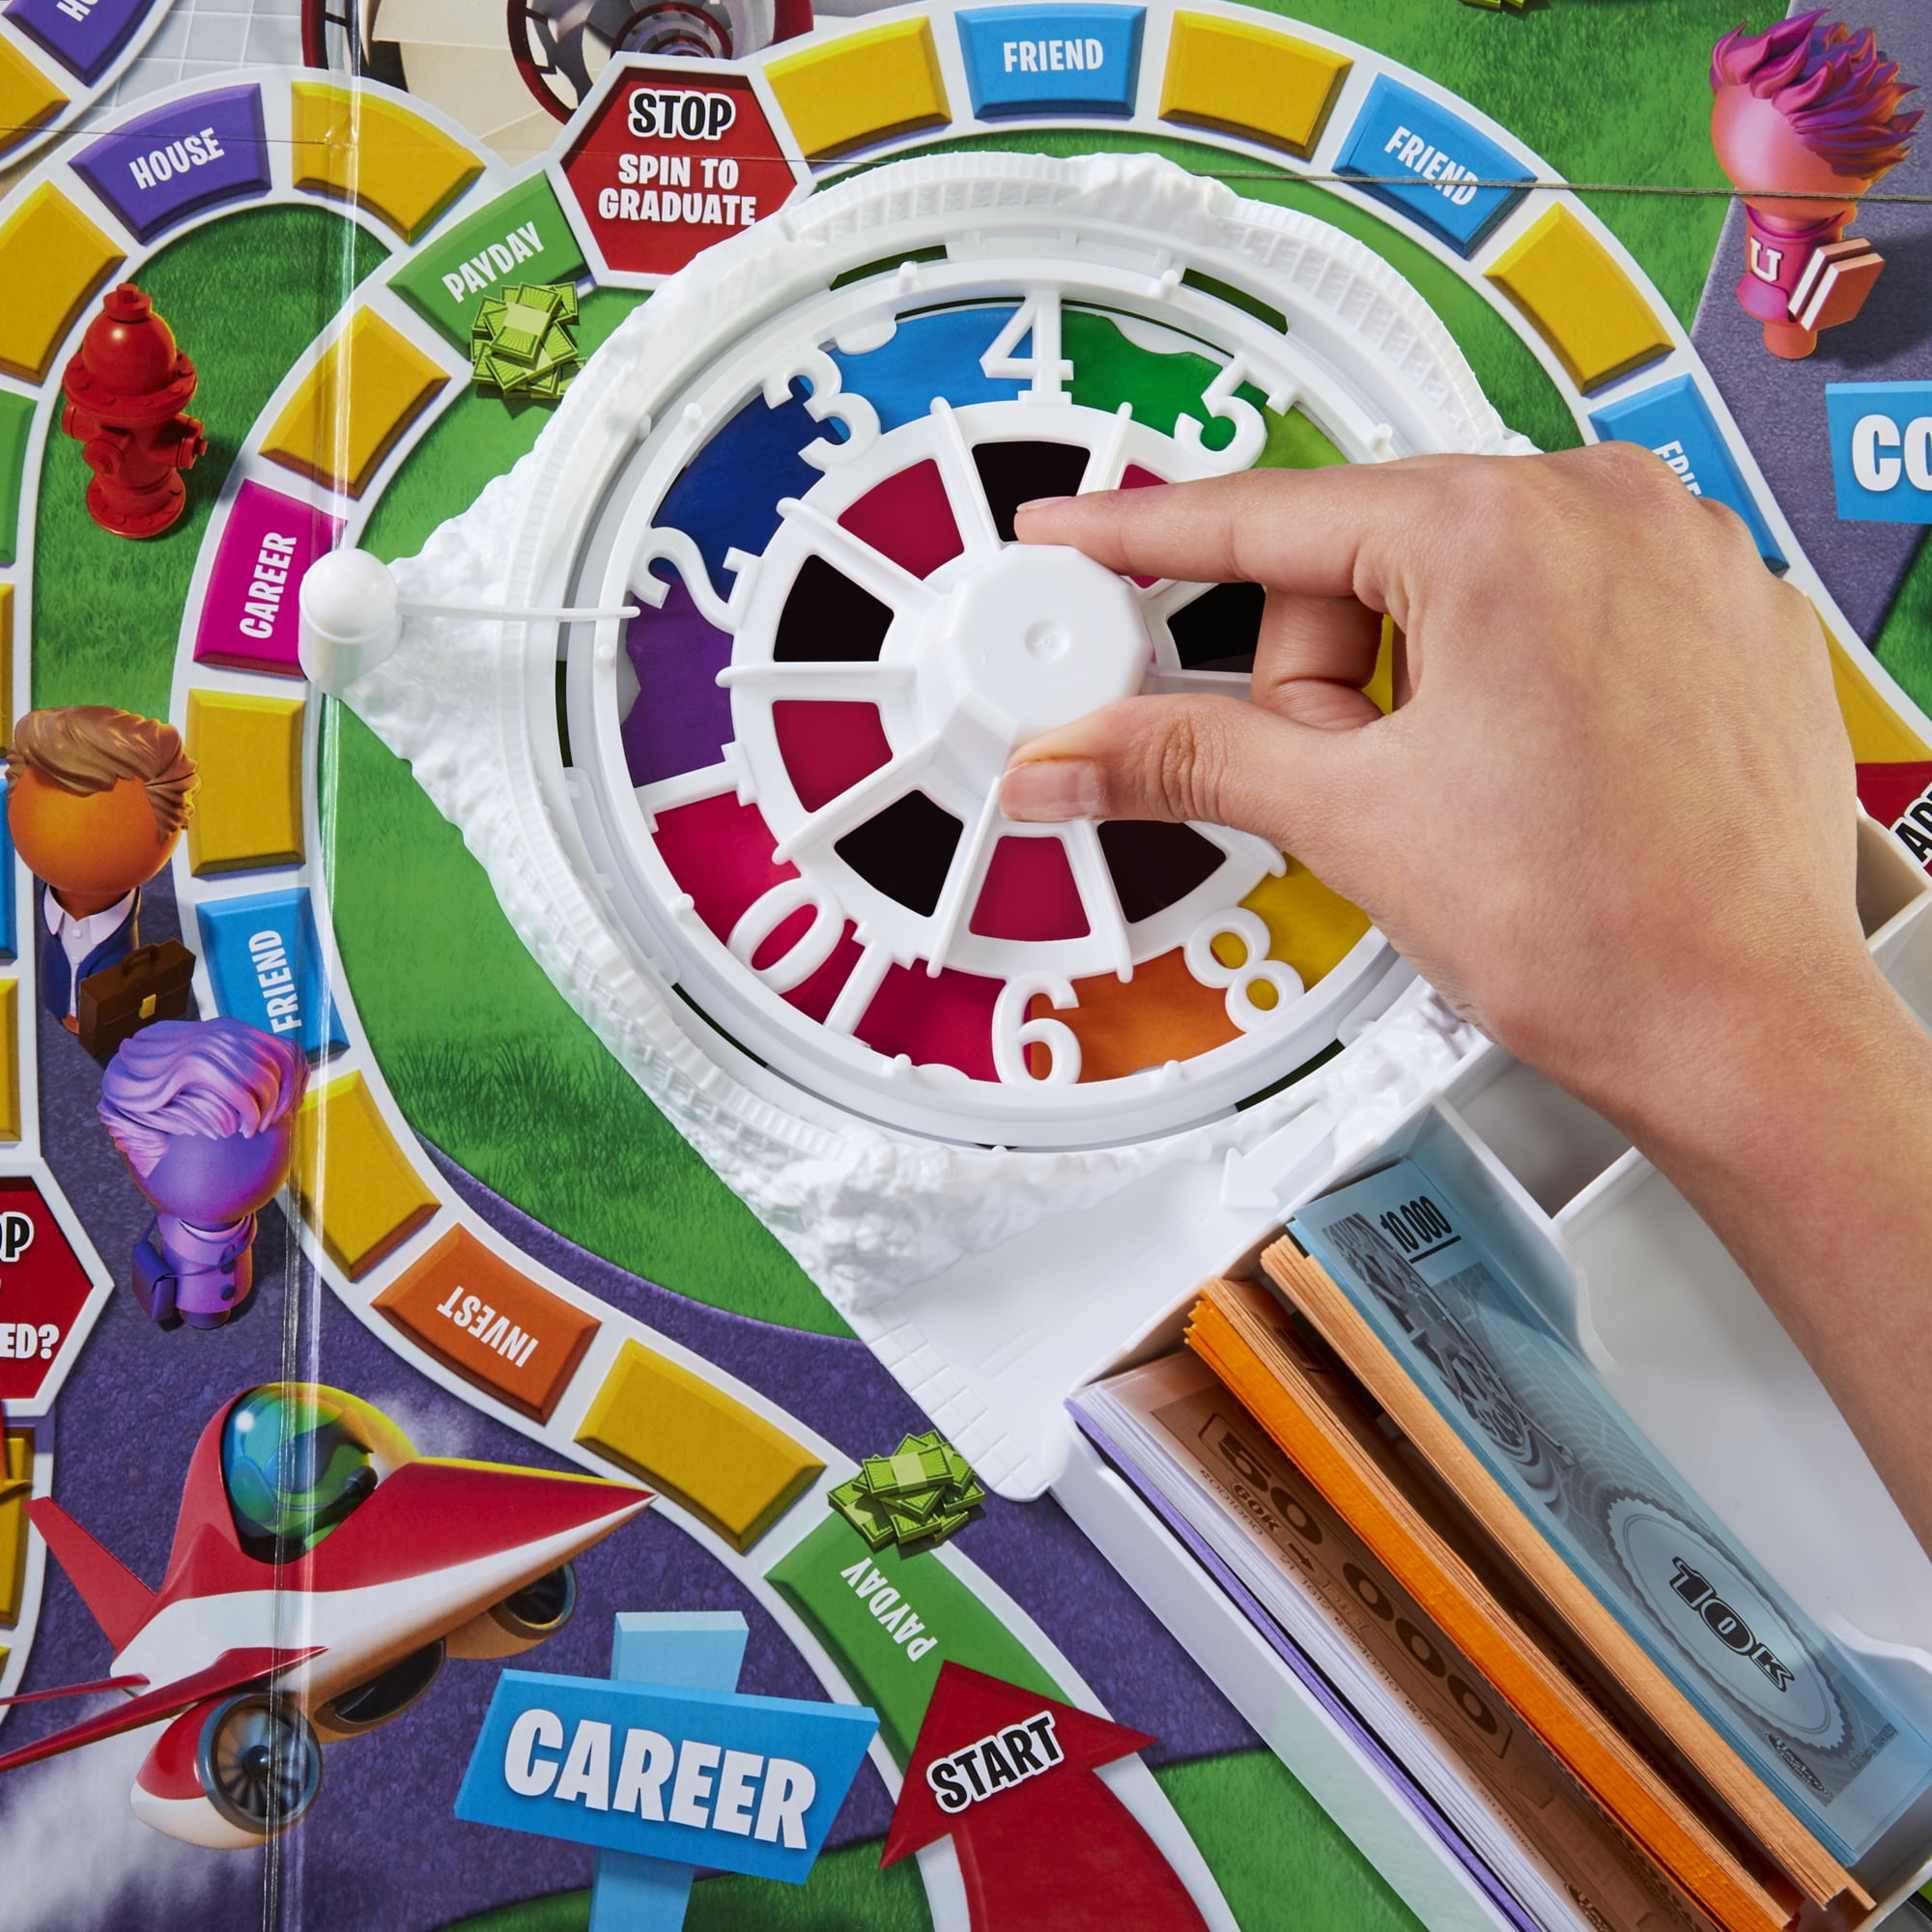 The Game of Life, Board Game for Kids Ages 8 and Up, Game for 2 to 4 Players